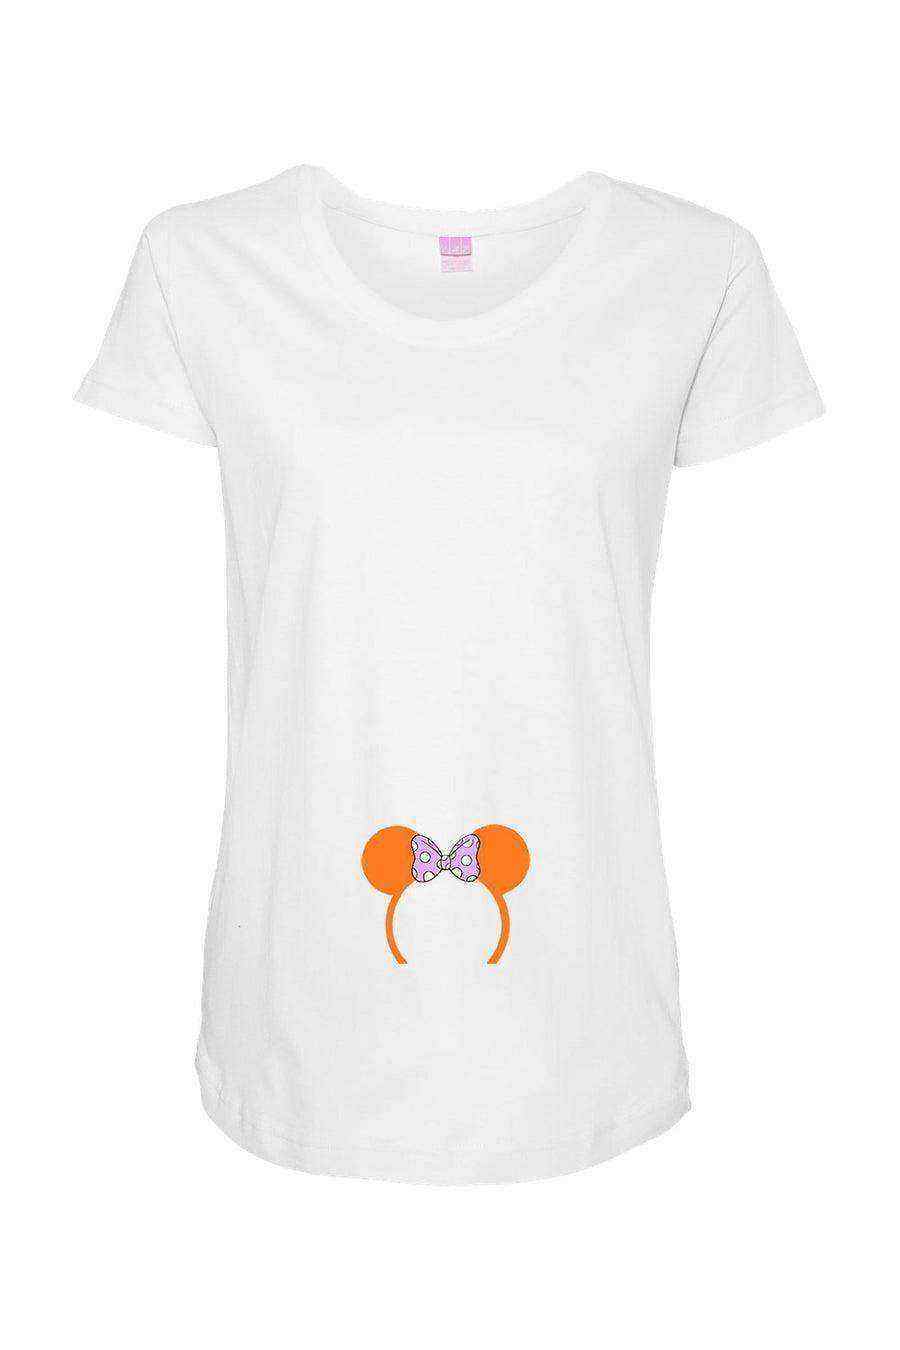 Babys first Trip (Figment Ears) Maternity Shirt - Dylan's Tees